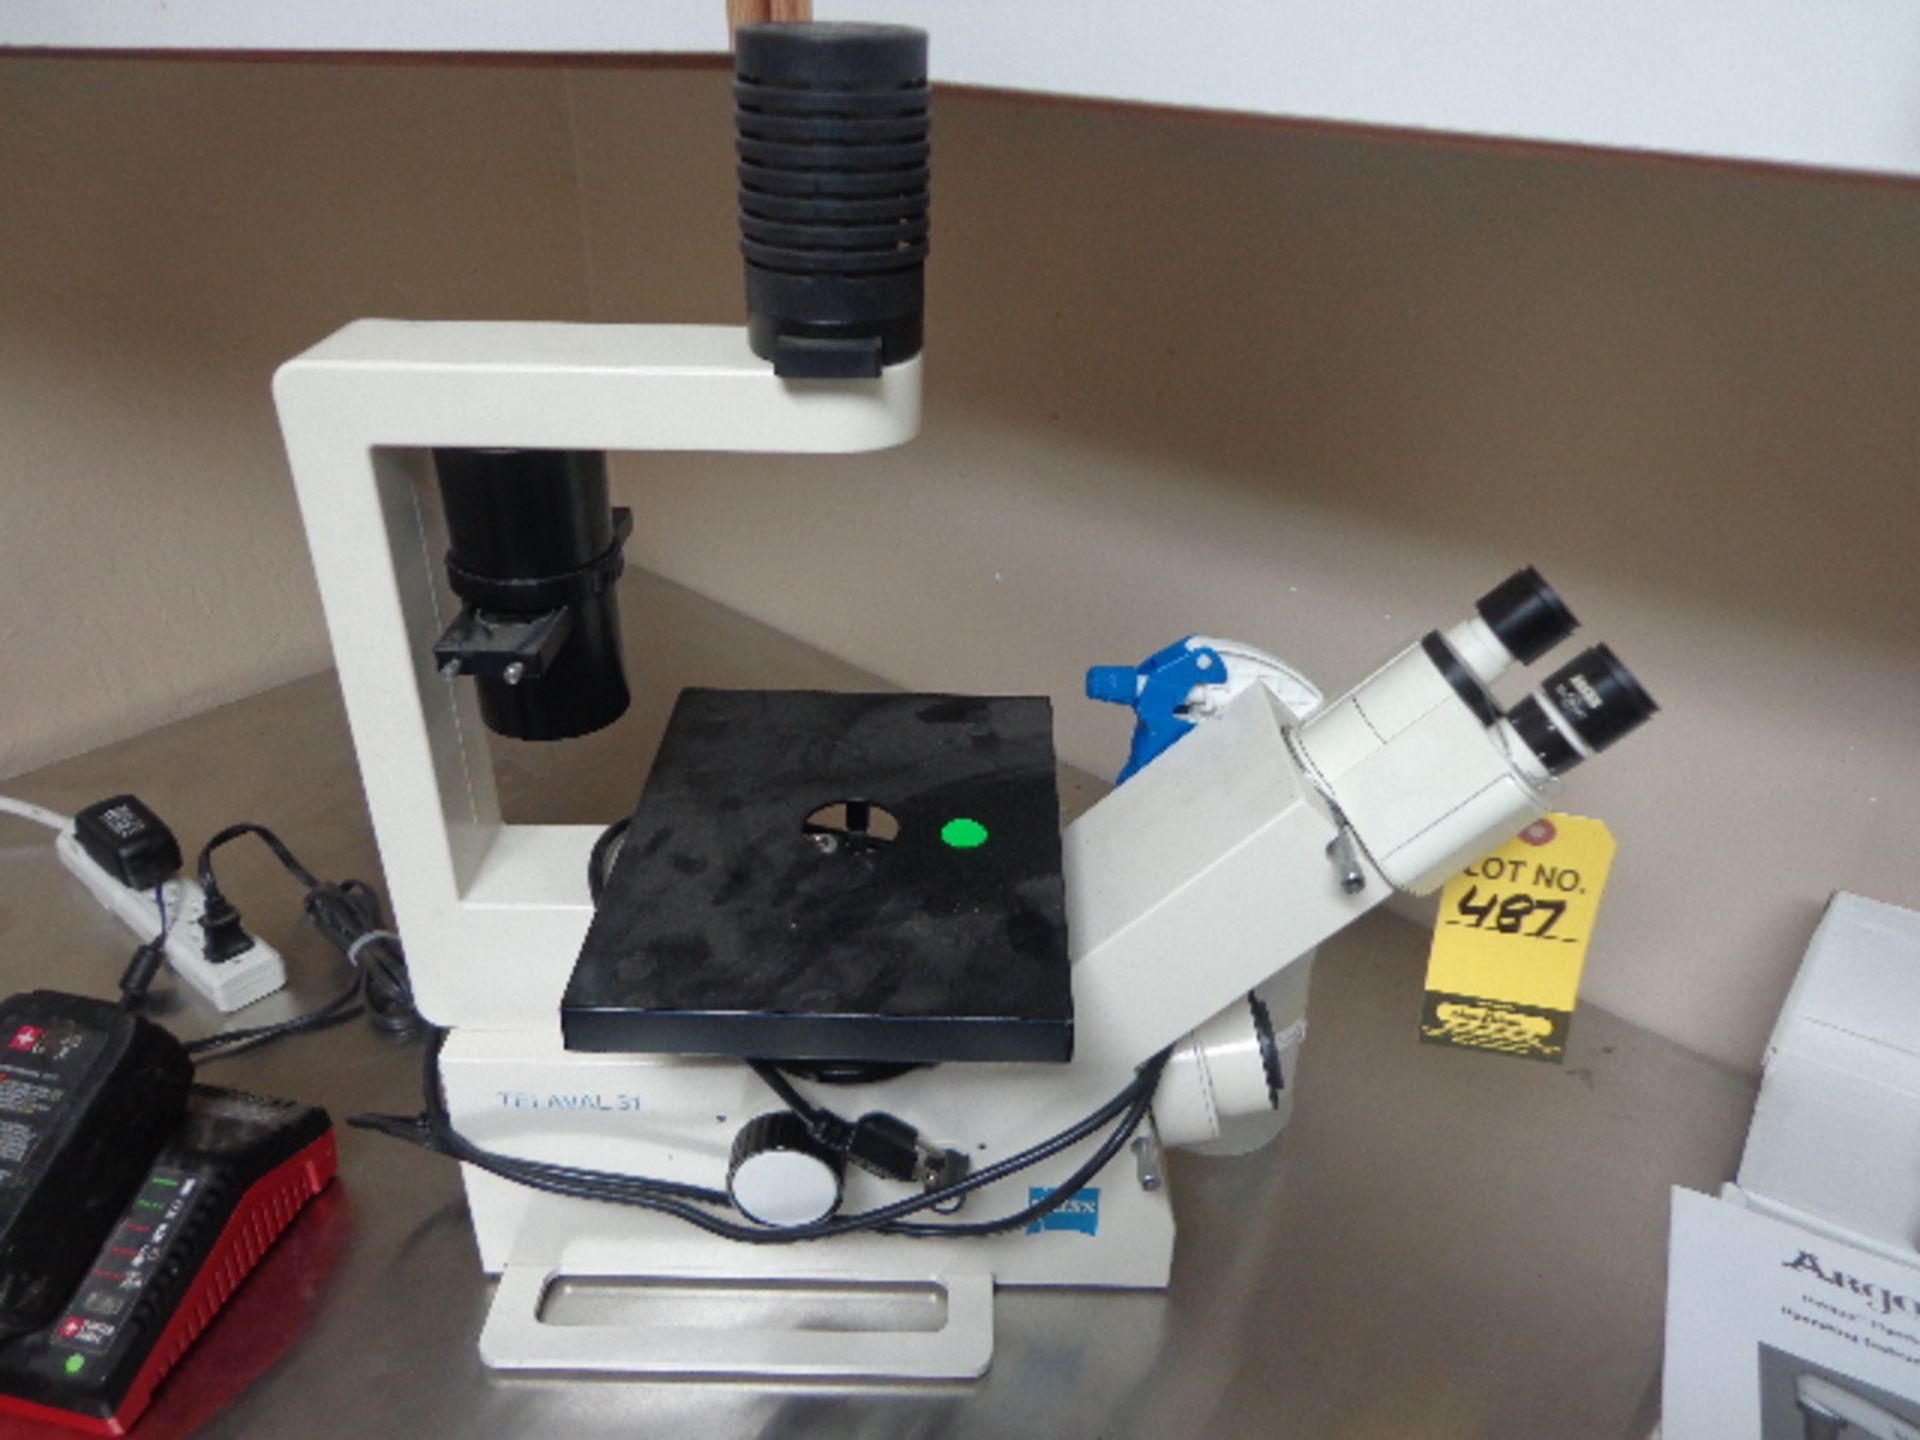 ZEISS TELAVAL 31 INVERTED PHASE CONTRAST MICROSCOPE 5501717